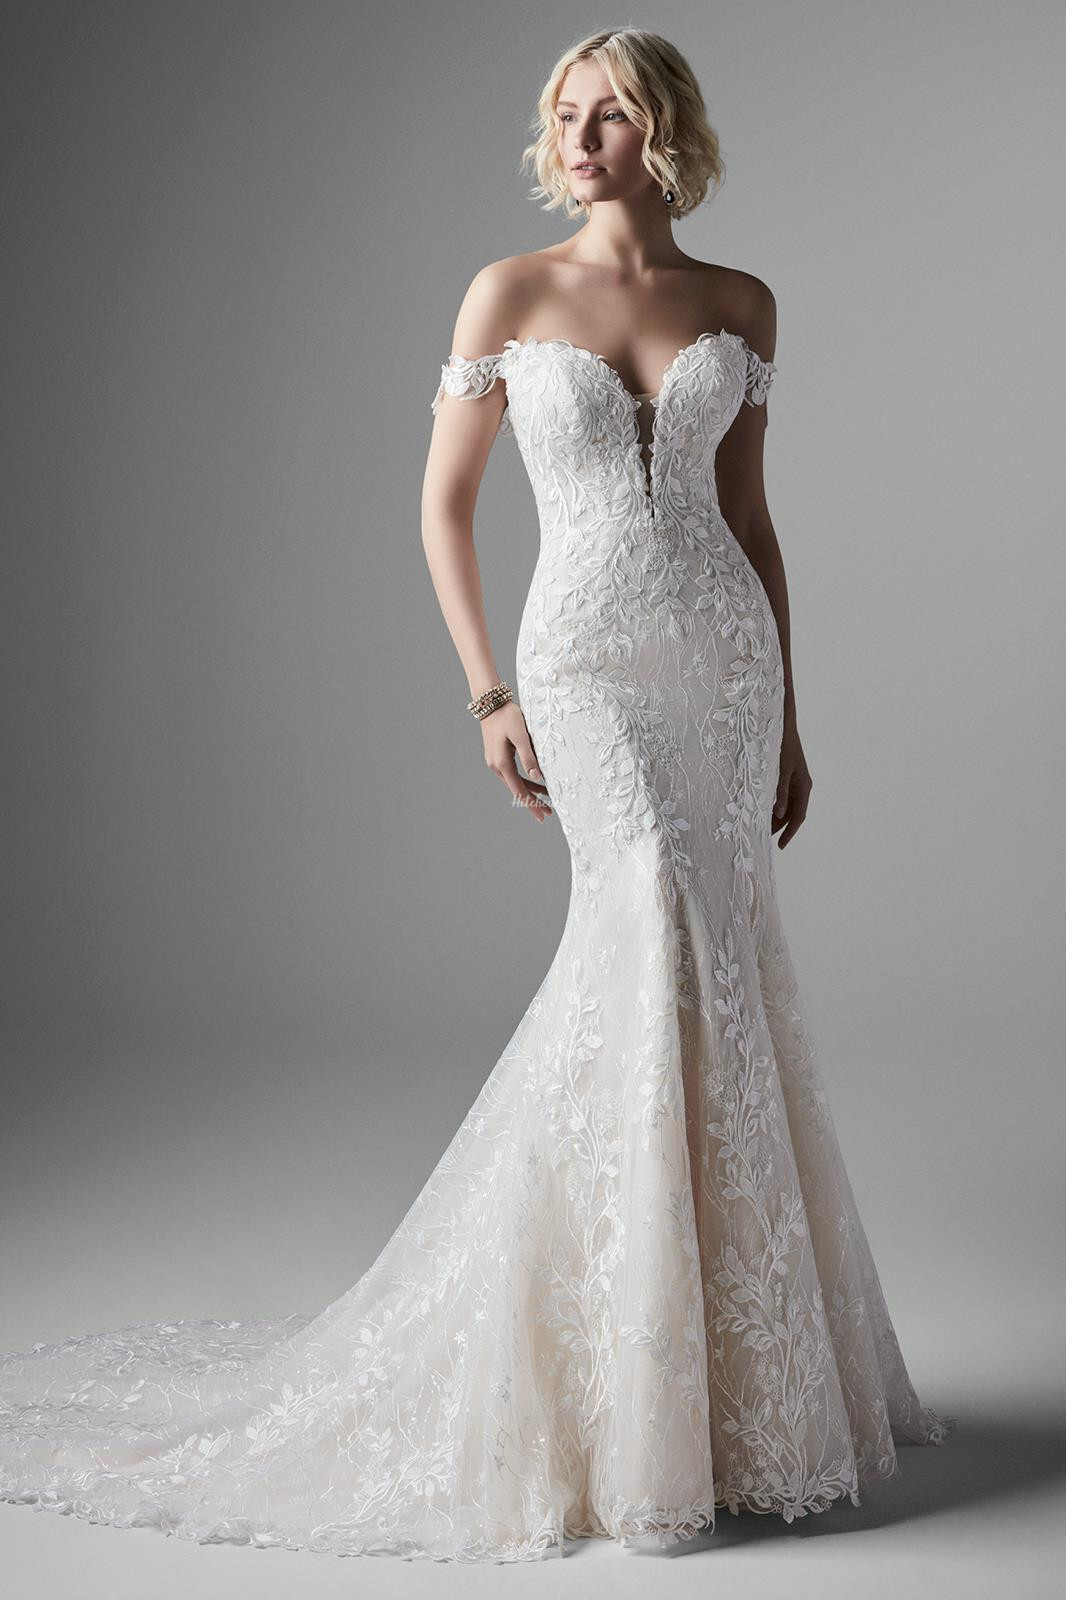 Collin Wedding Dress from Sottero & Midgley - hitched.co.uk